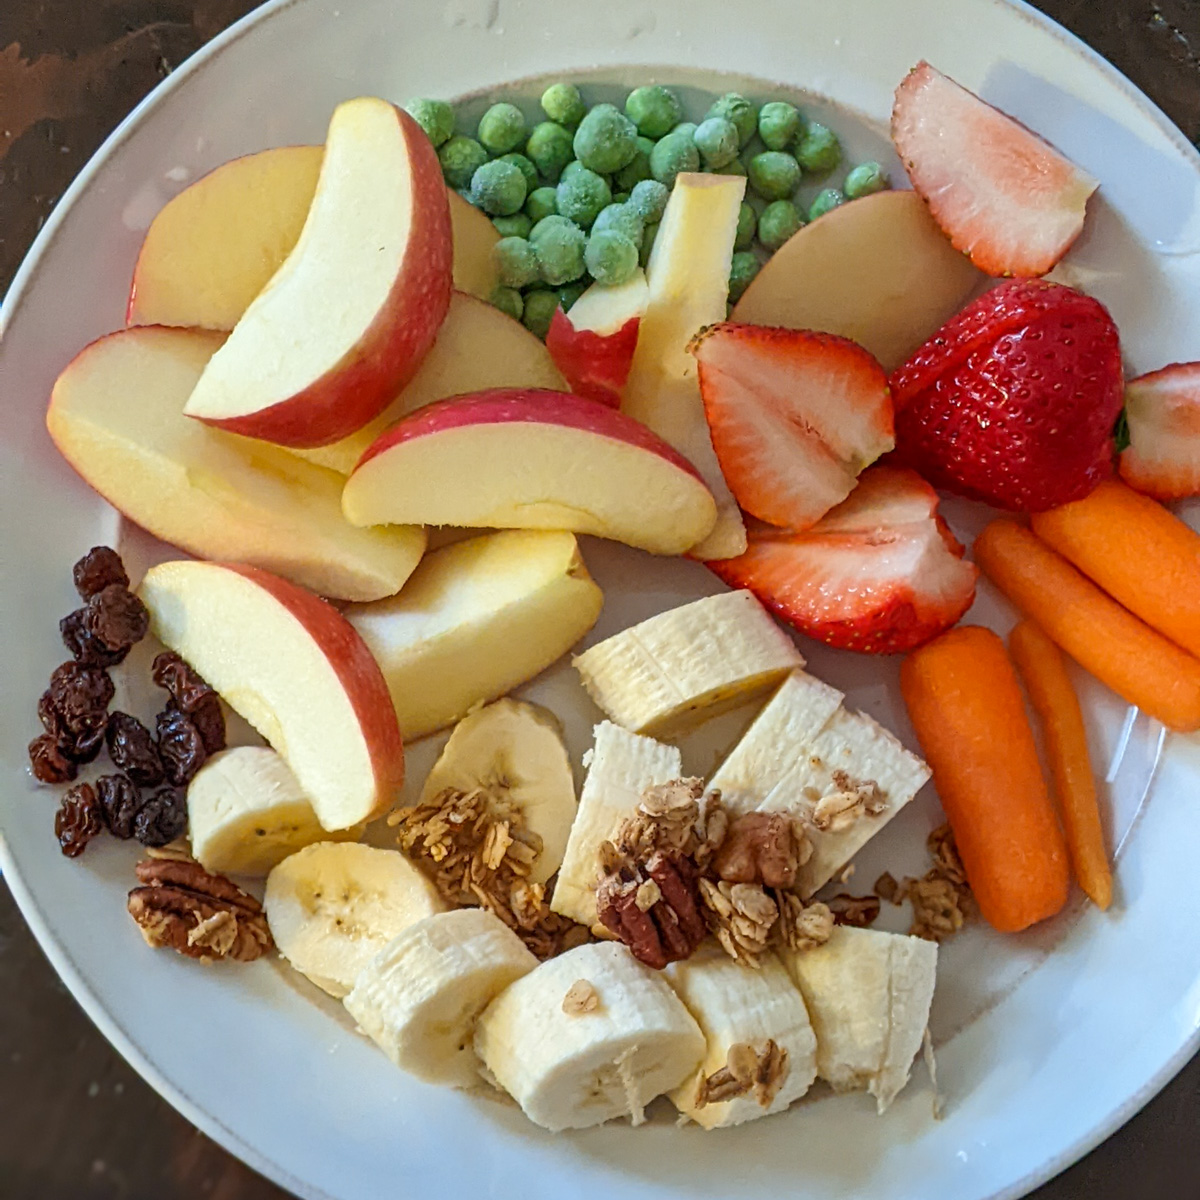 A Healthy bedtime kid's snack with apples, banana and granola, carrots, strawberries, raisins and peas.